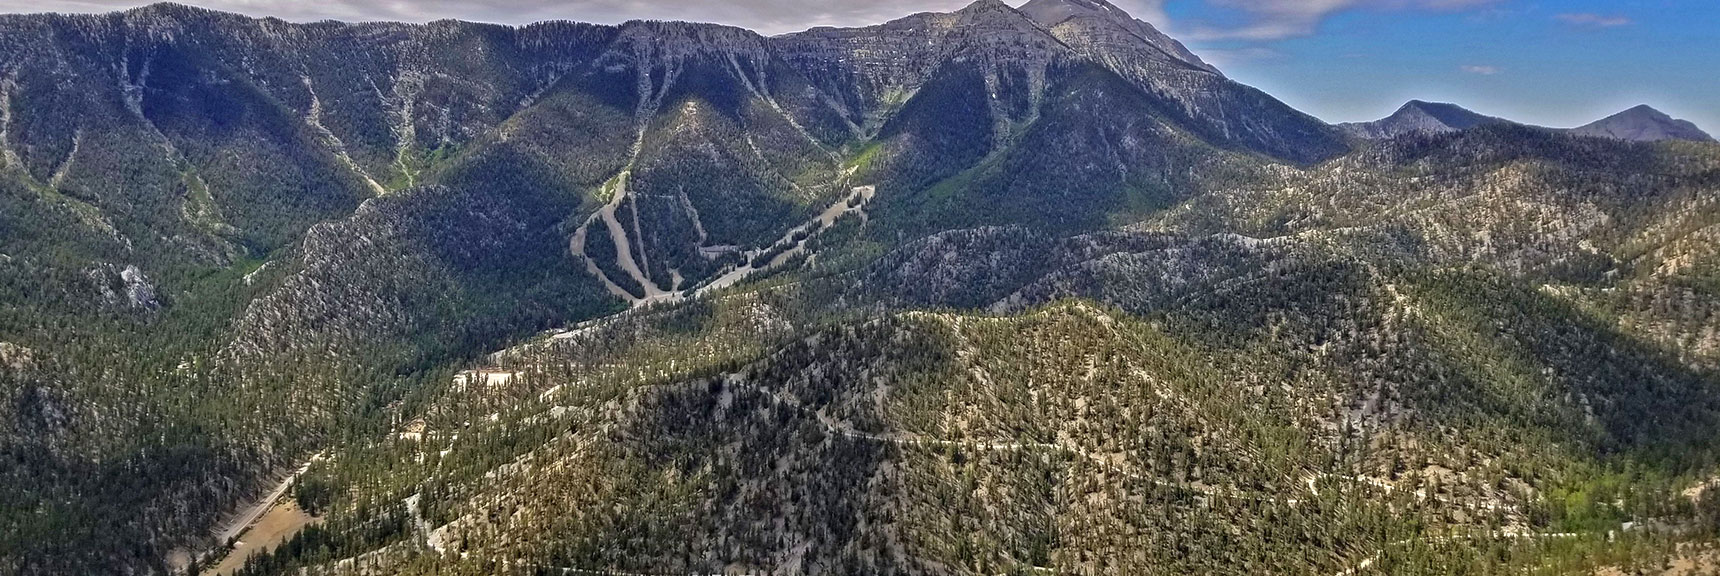 View Down into Upper Lee Canyon, Lower Bristlecone Pine Trail, Ski Runs | The Sisters South | Lee Canyon | Mt Charleston Wilderness | Spring Mountains, Nevada